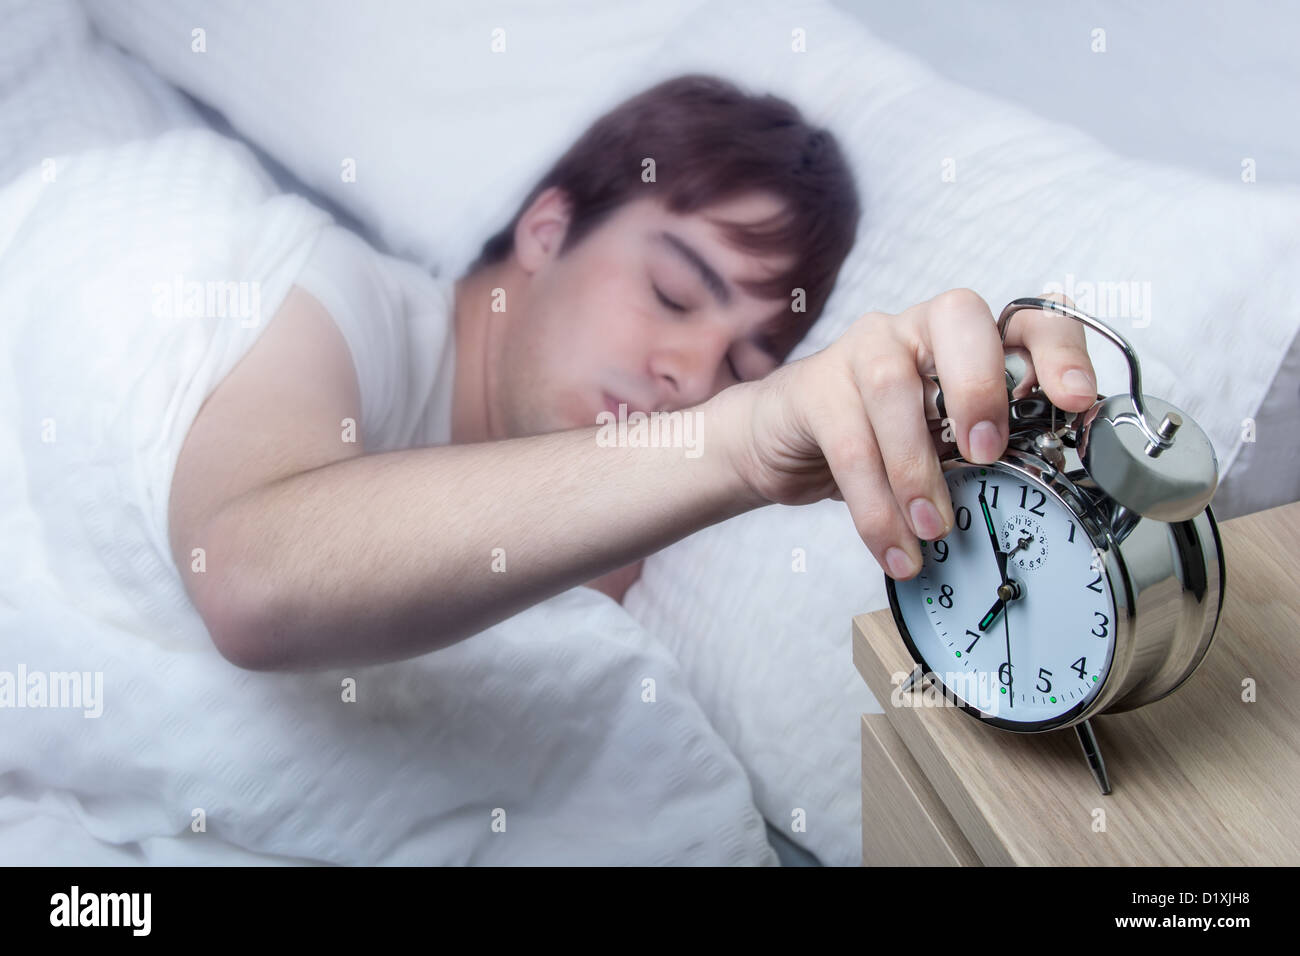 Close up of an old fashioned alarm clock, young man turning it off still half asleep. Stock Photo